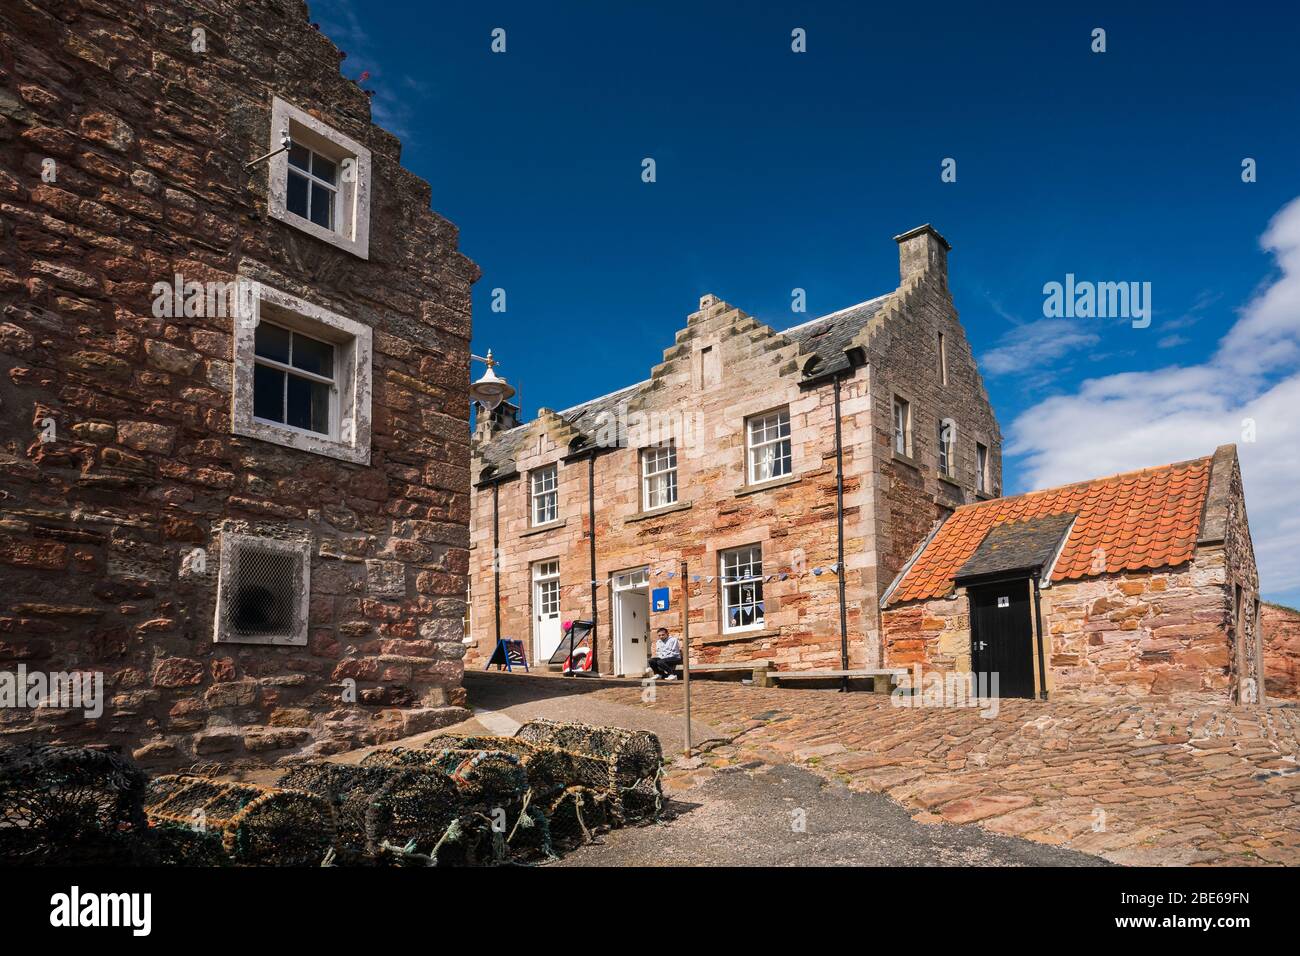 A local man sits on a bench outside a stone building around the fishing harbor, Crail, Kingdom of Fife, Scotland, Europe Stock Photo